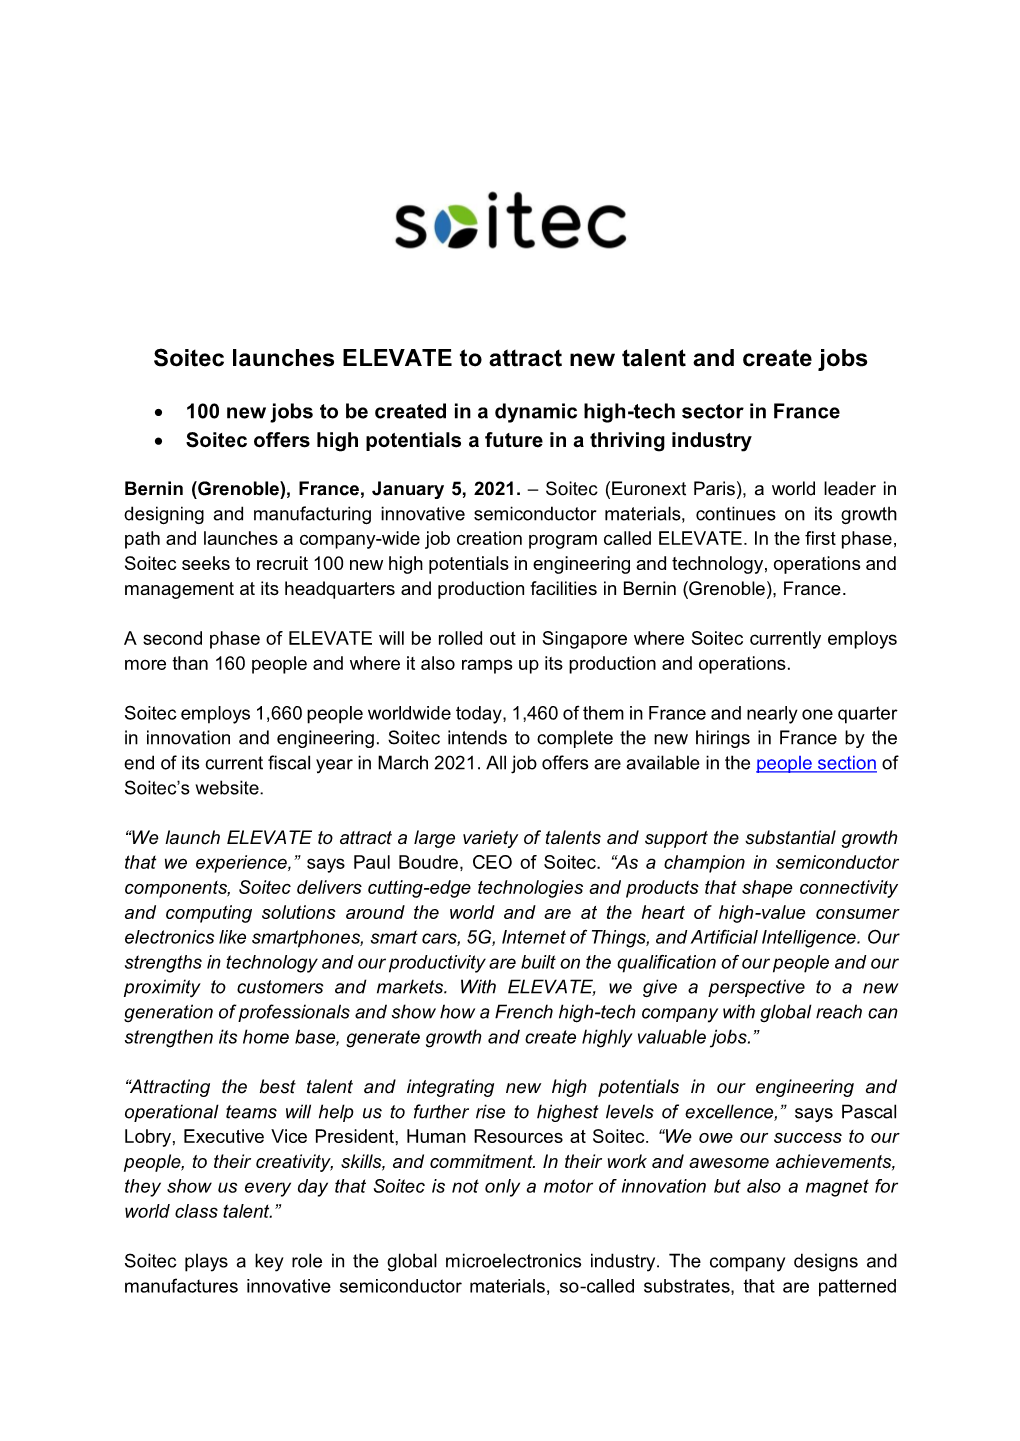 Soitec Launches ELEVATE to Attract New Talent and Create Jobs